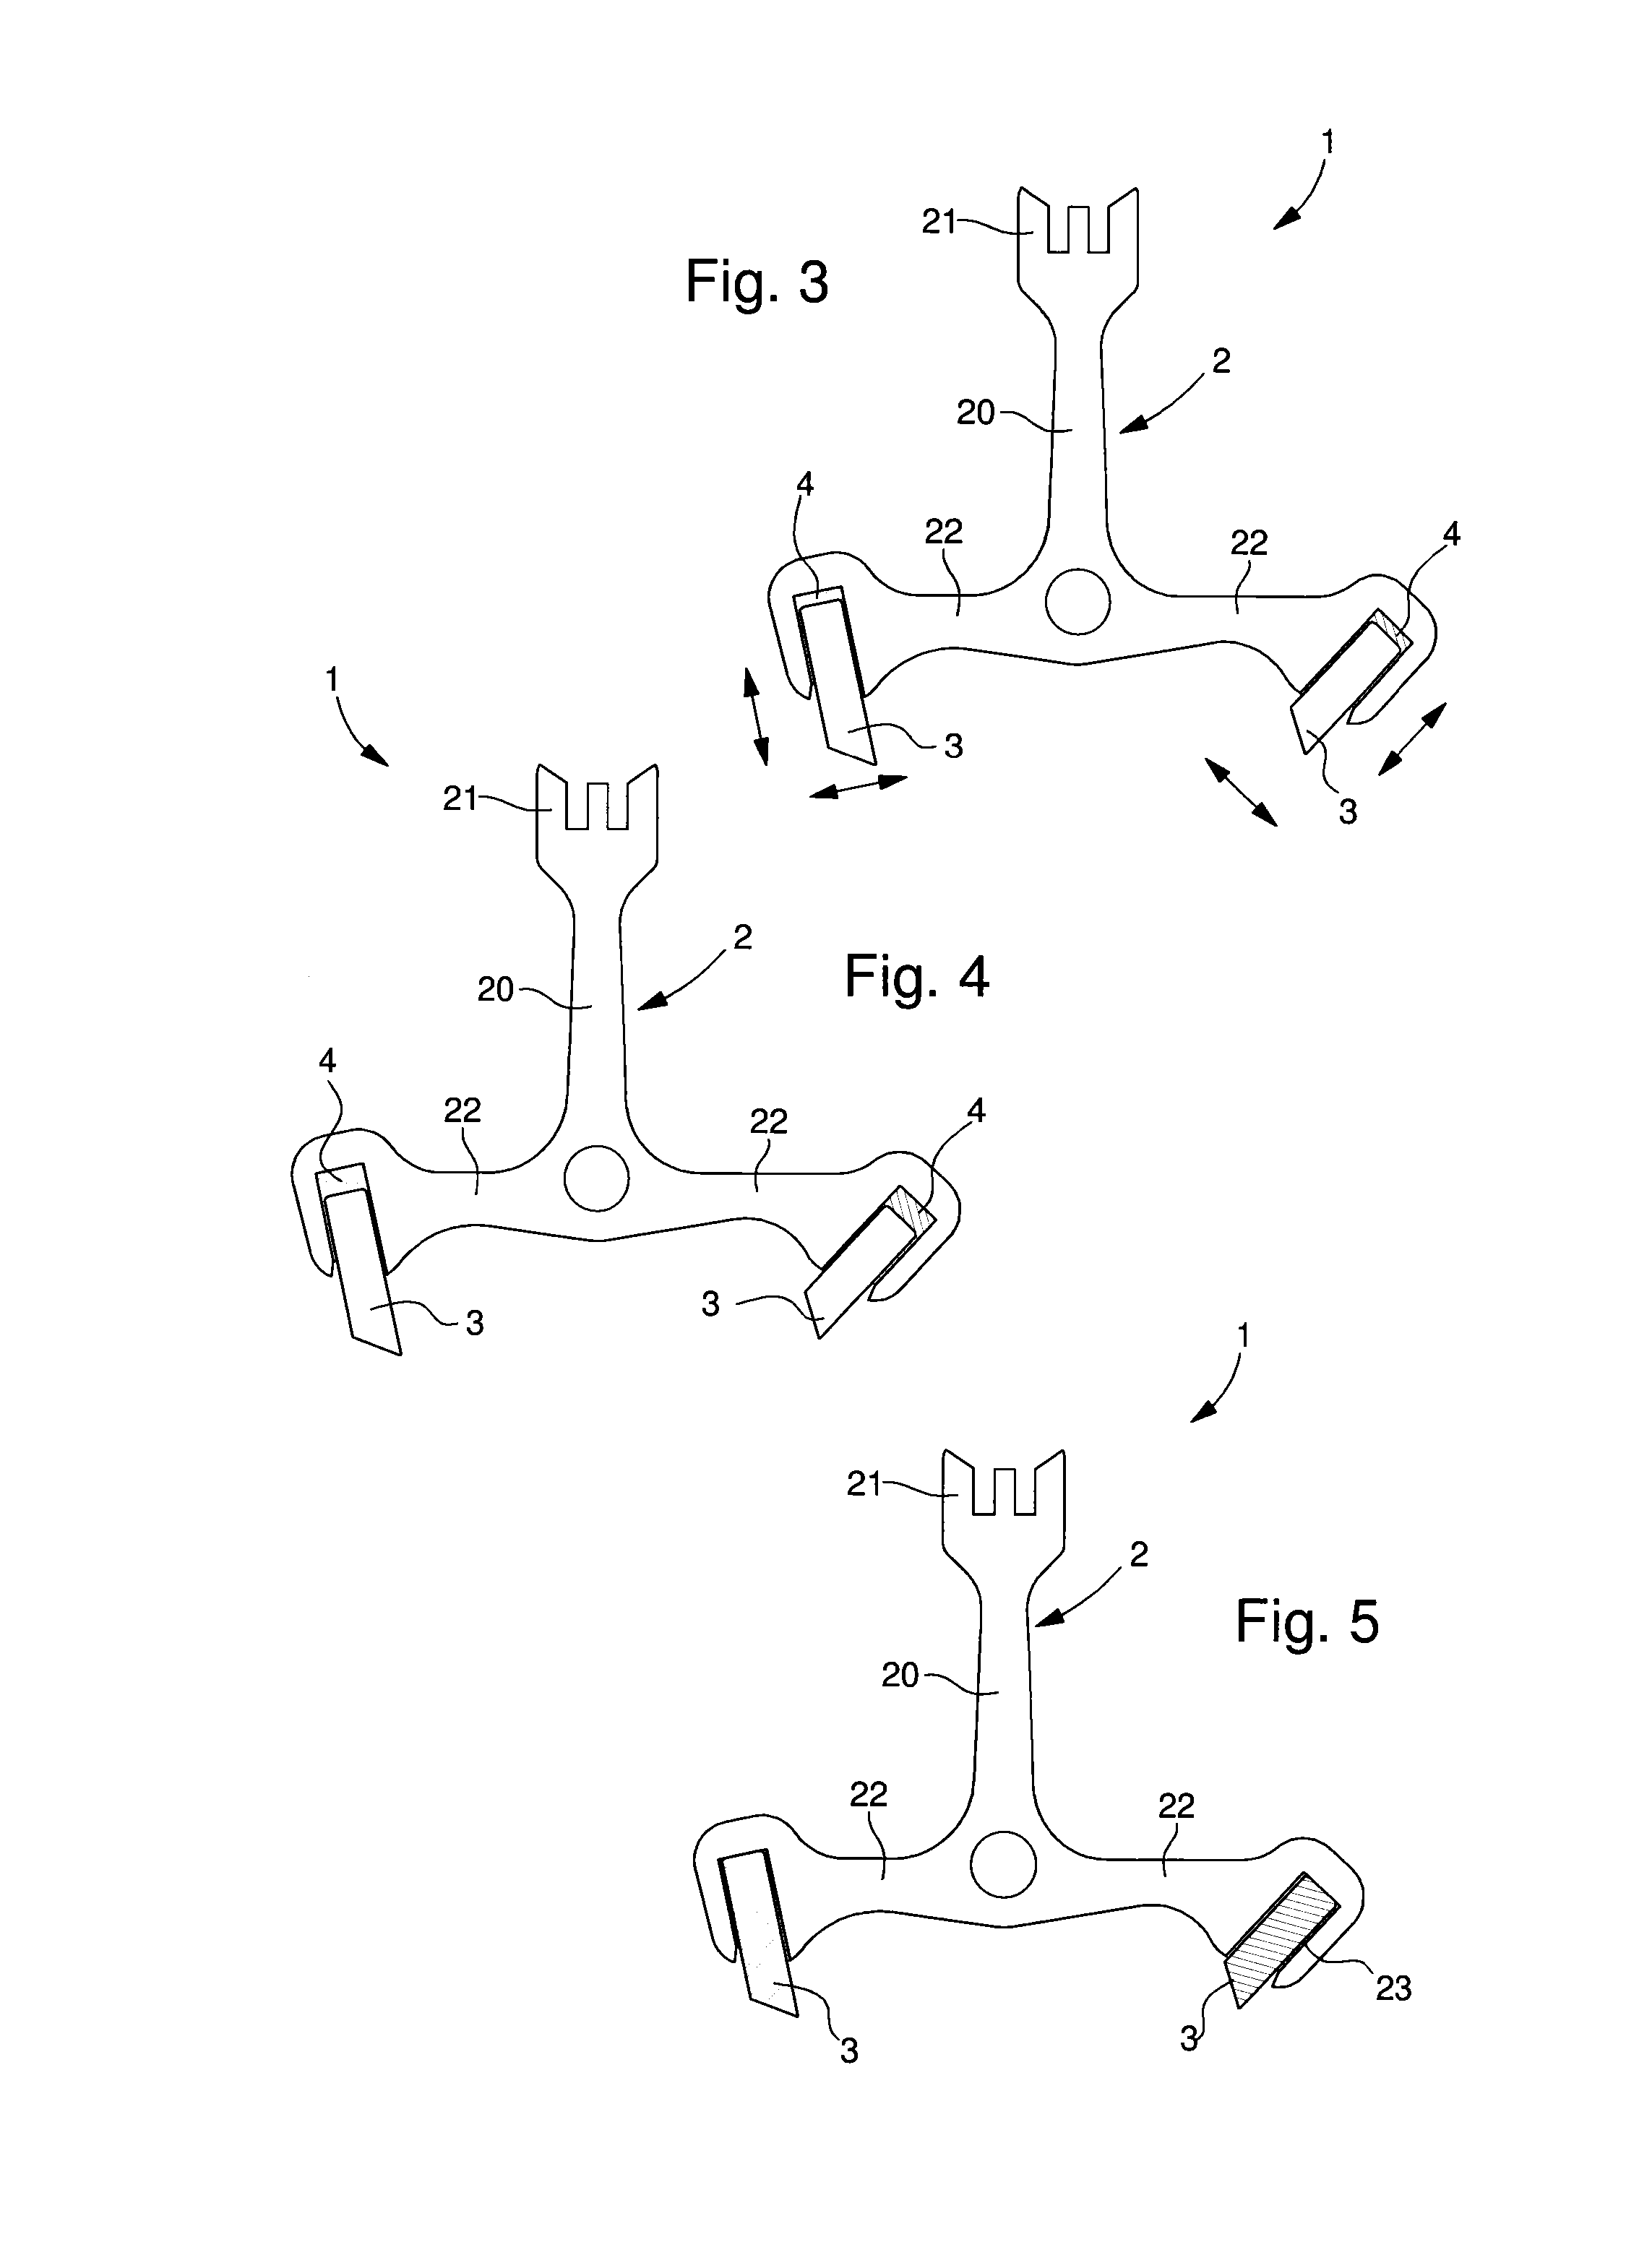 Process for adjusting the relative position of a first and a second piece of a mechanical assembly